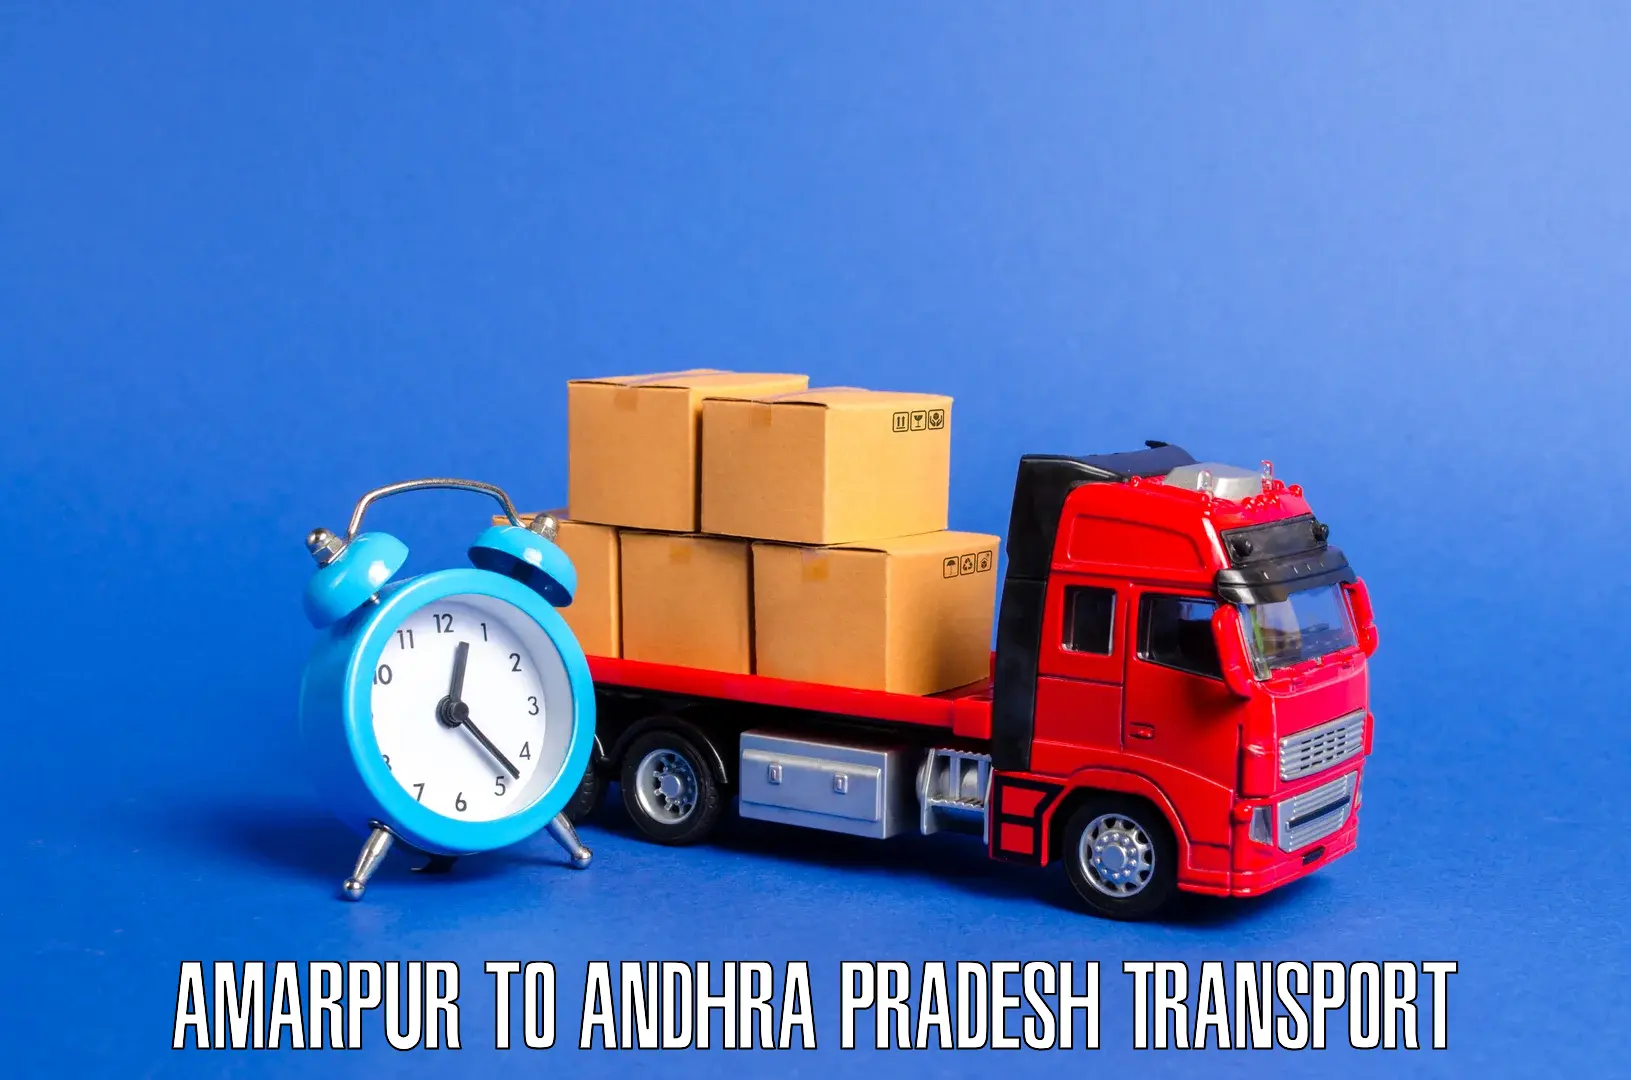 Goods delivery service Amarpur to Mangalagiri